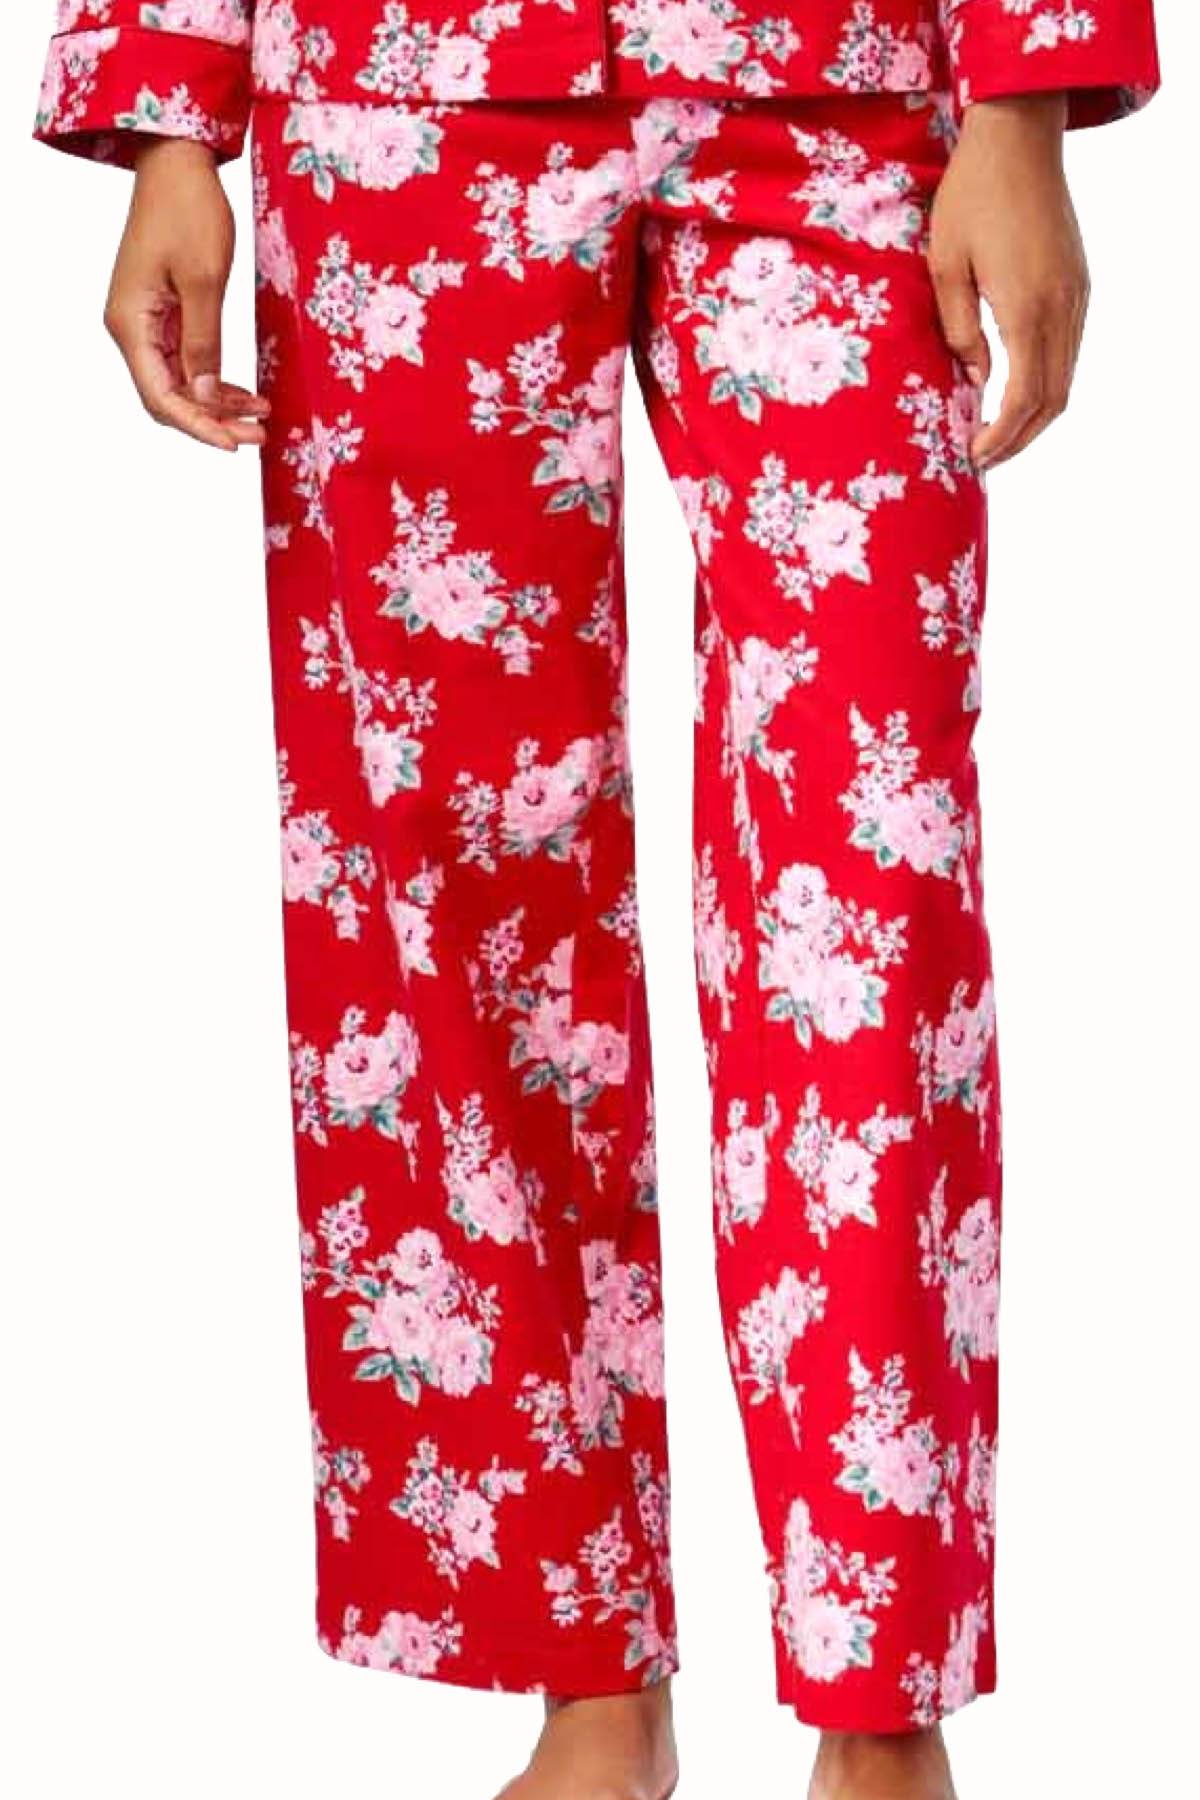 Charter Club Intimates Red/Pink Rose Printed Flannel PJ 2-Piece Set